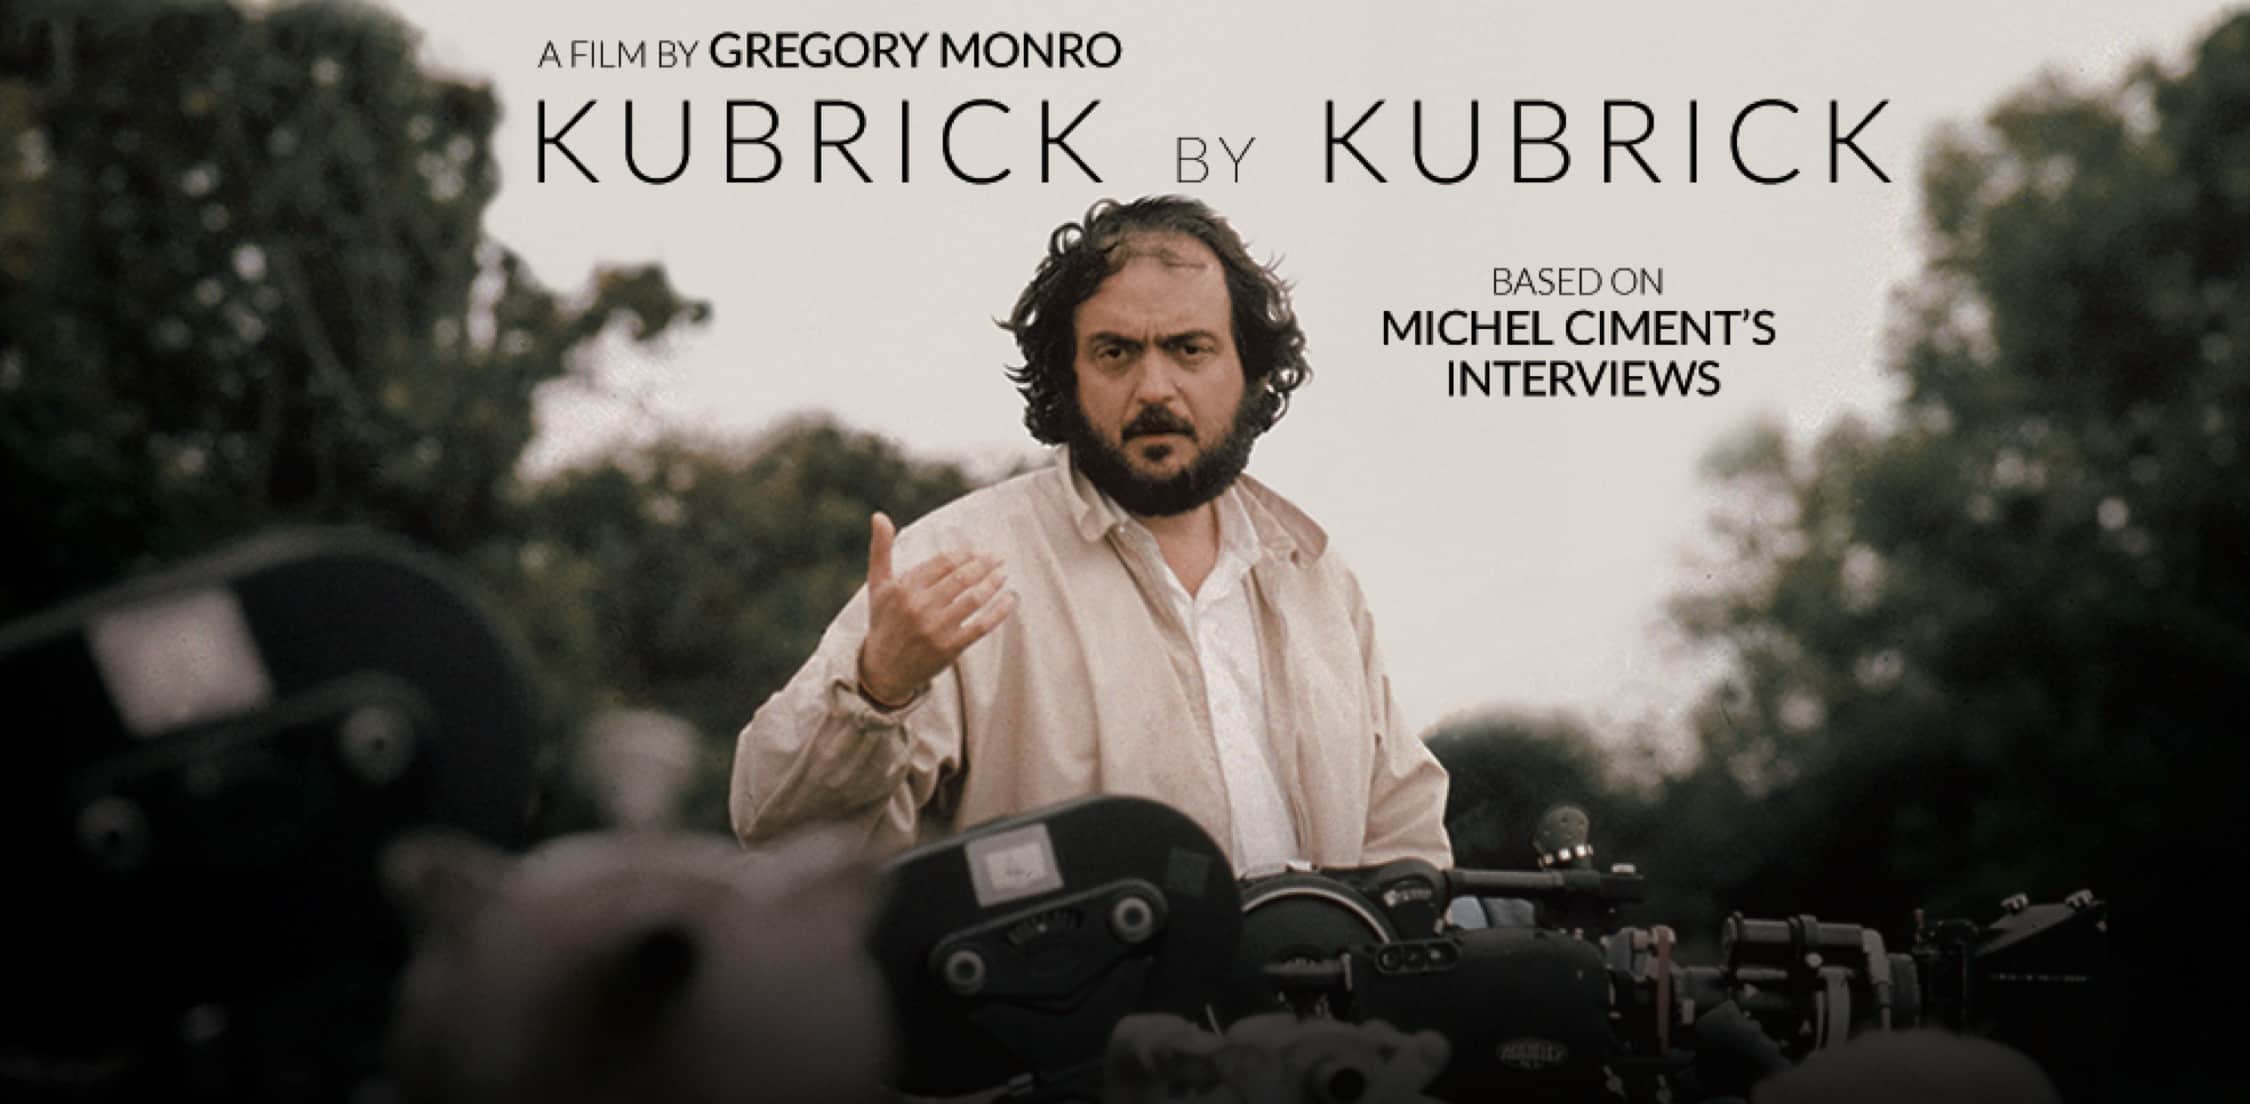 Kubrick by Kubrick arrives from Level 33 Entertainment on March 21st 18